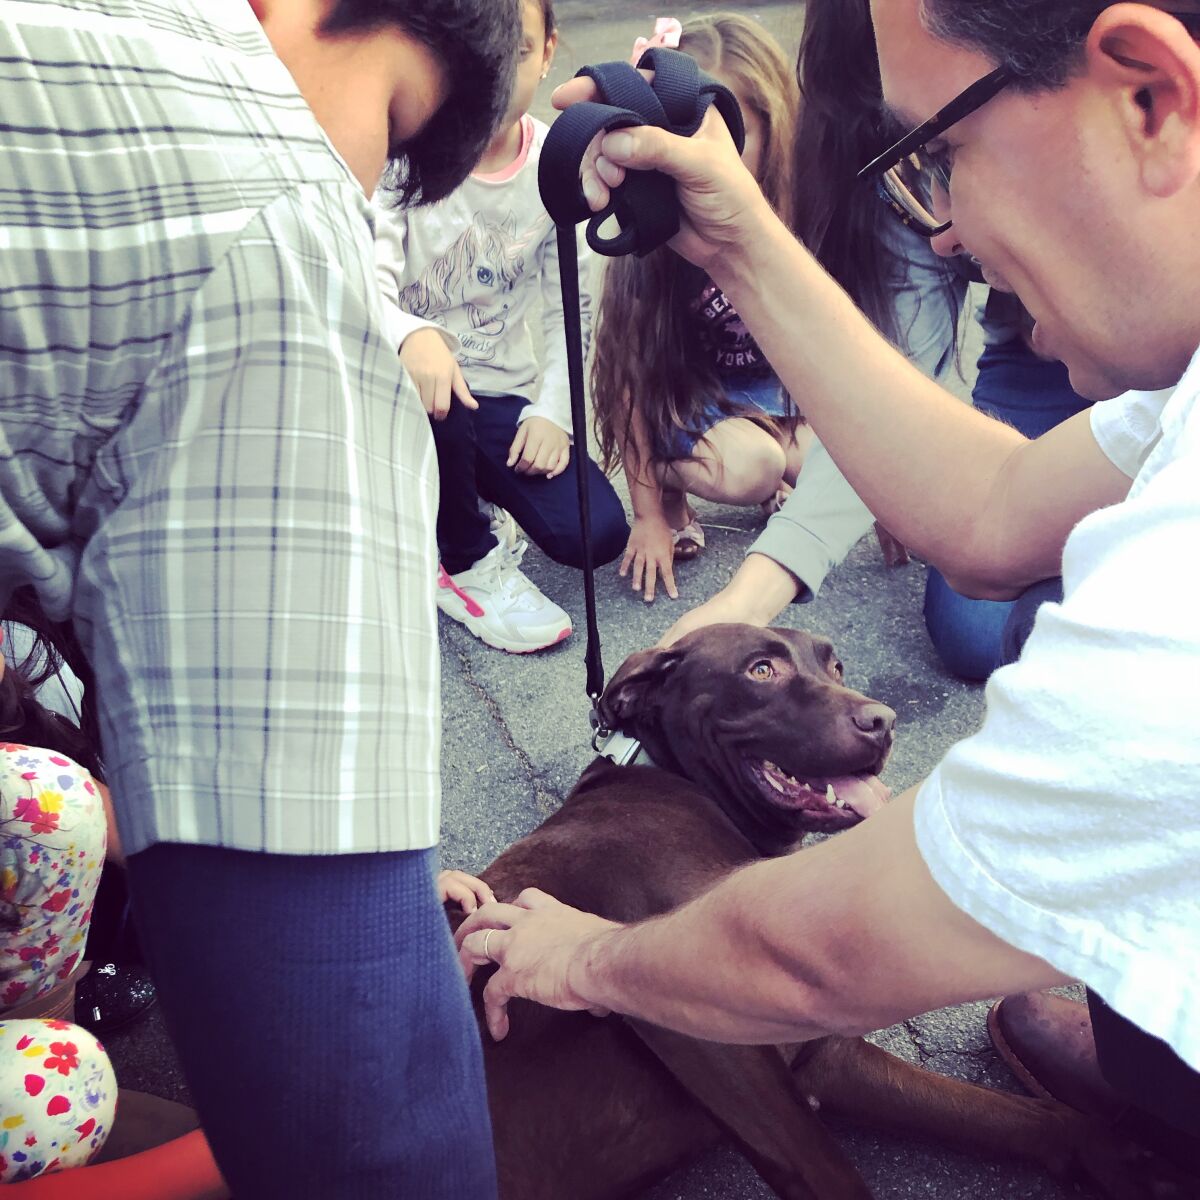 A brown dog gets belly rubs from a group of people